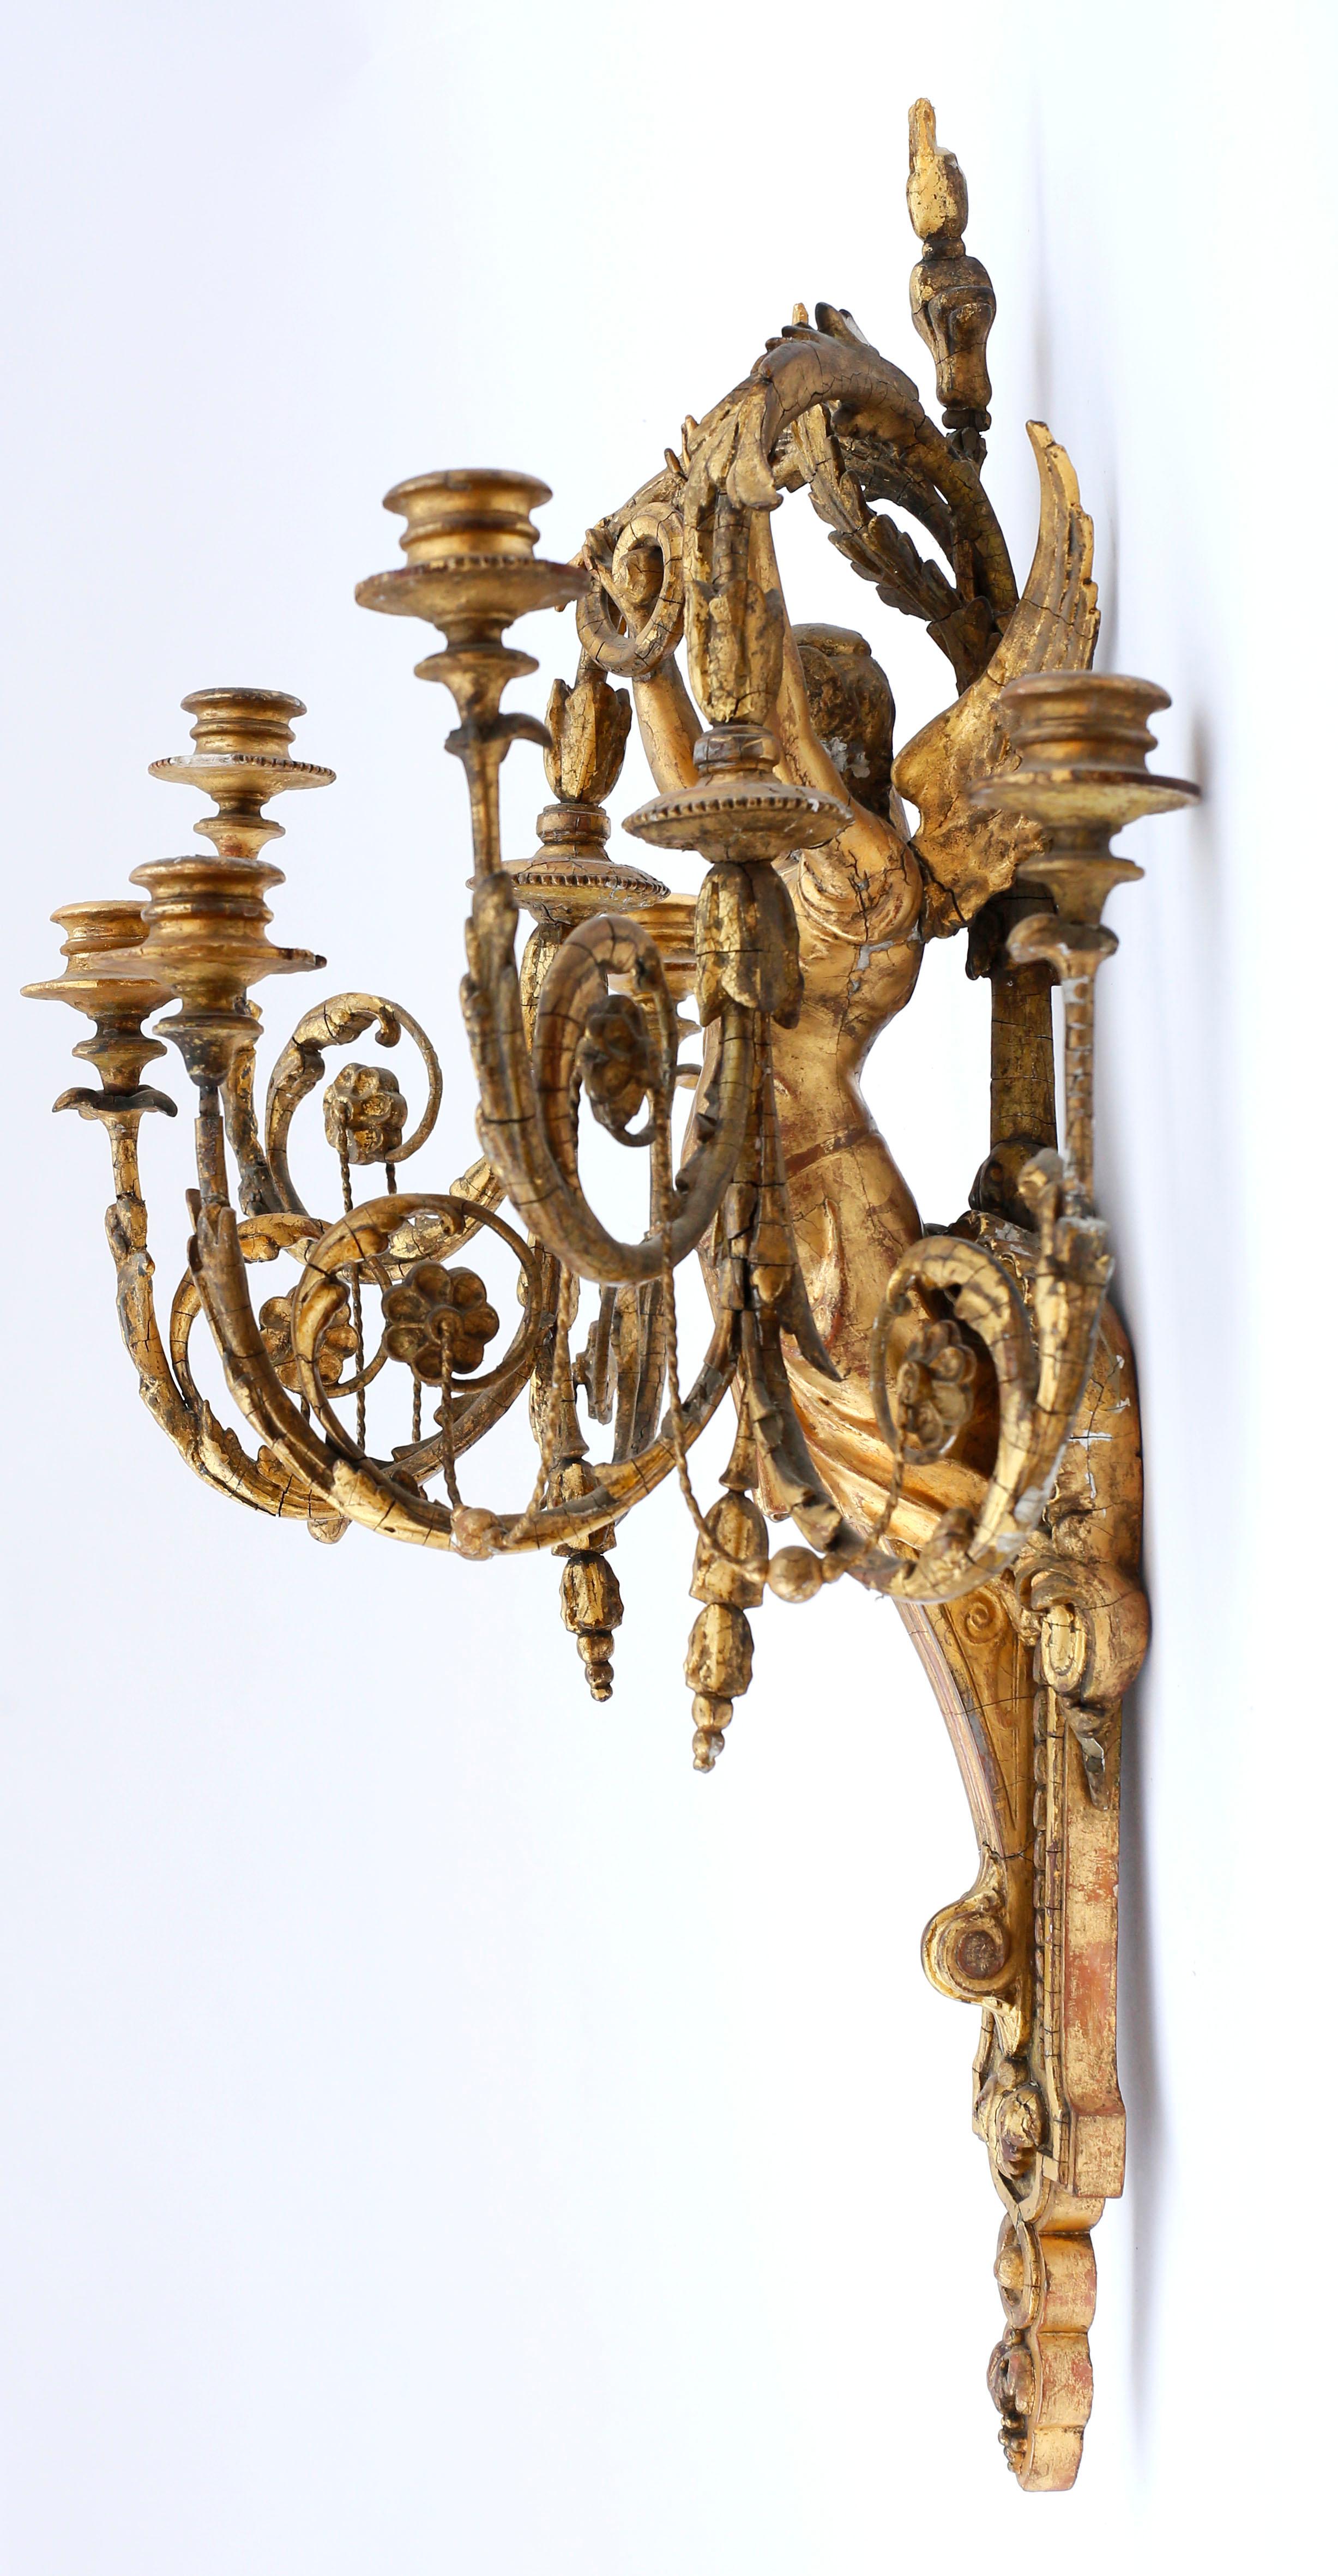 Pair of Early 19th Century Italian Neoclassical Gilt Figural Six-Light Sconces For Sale 1